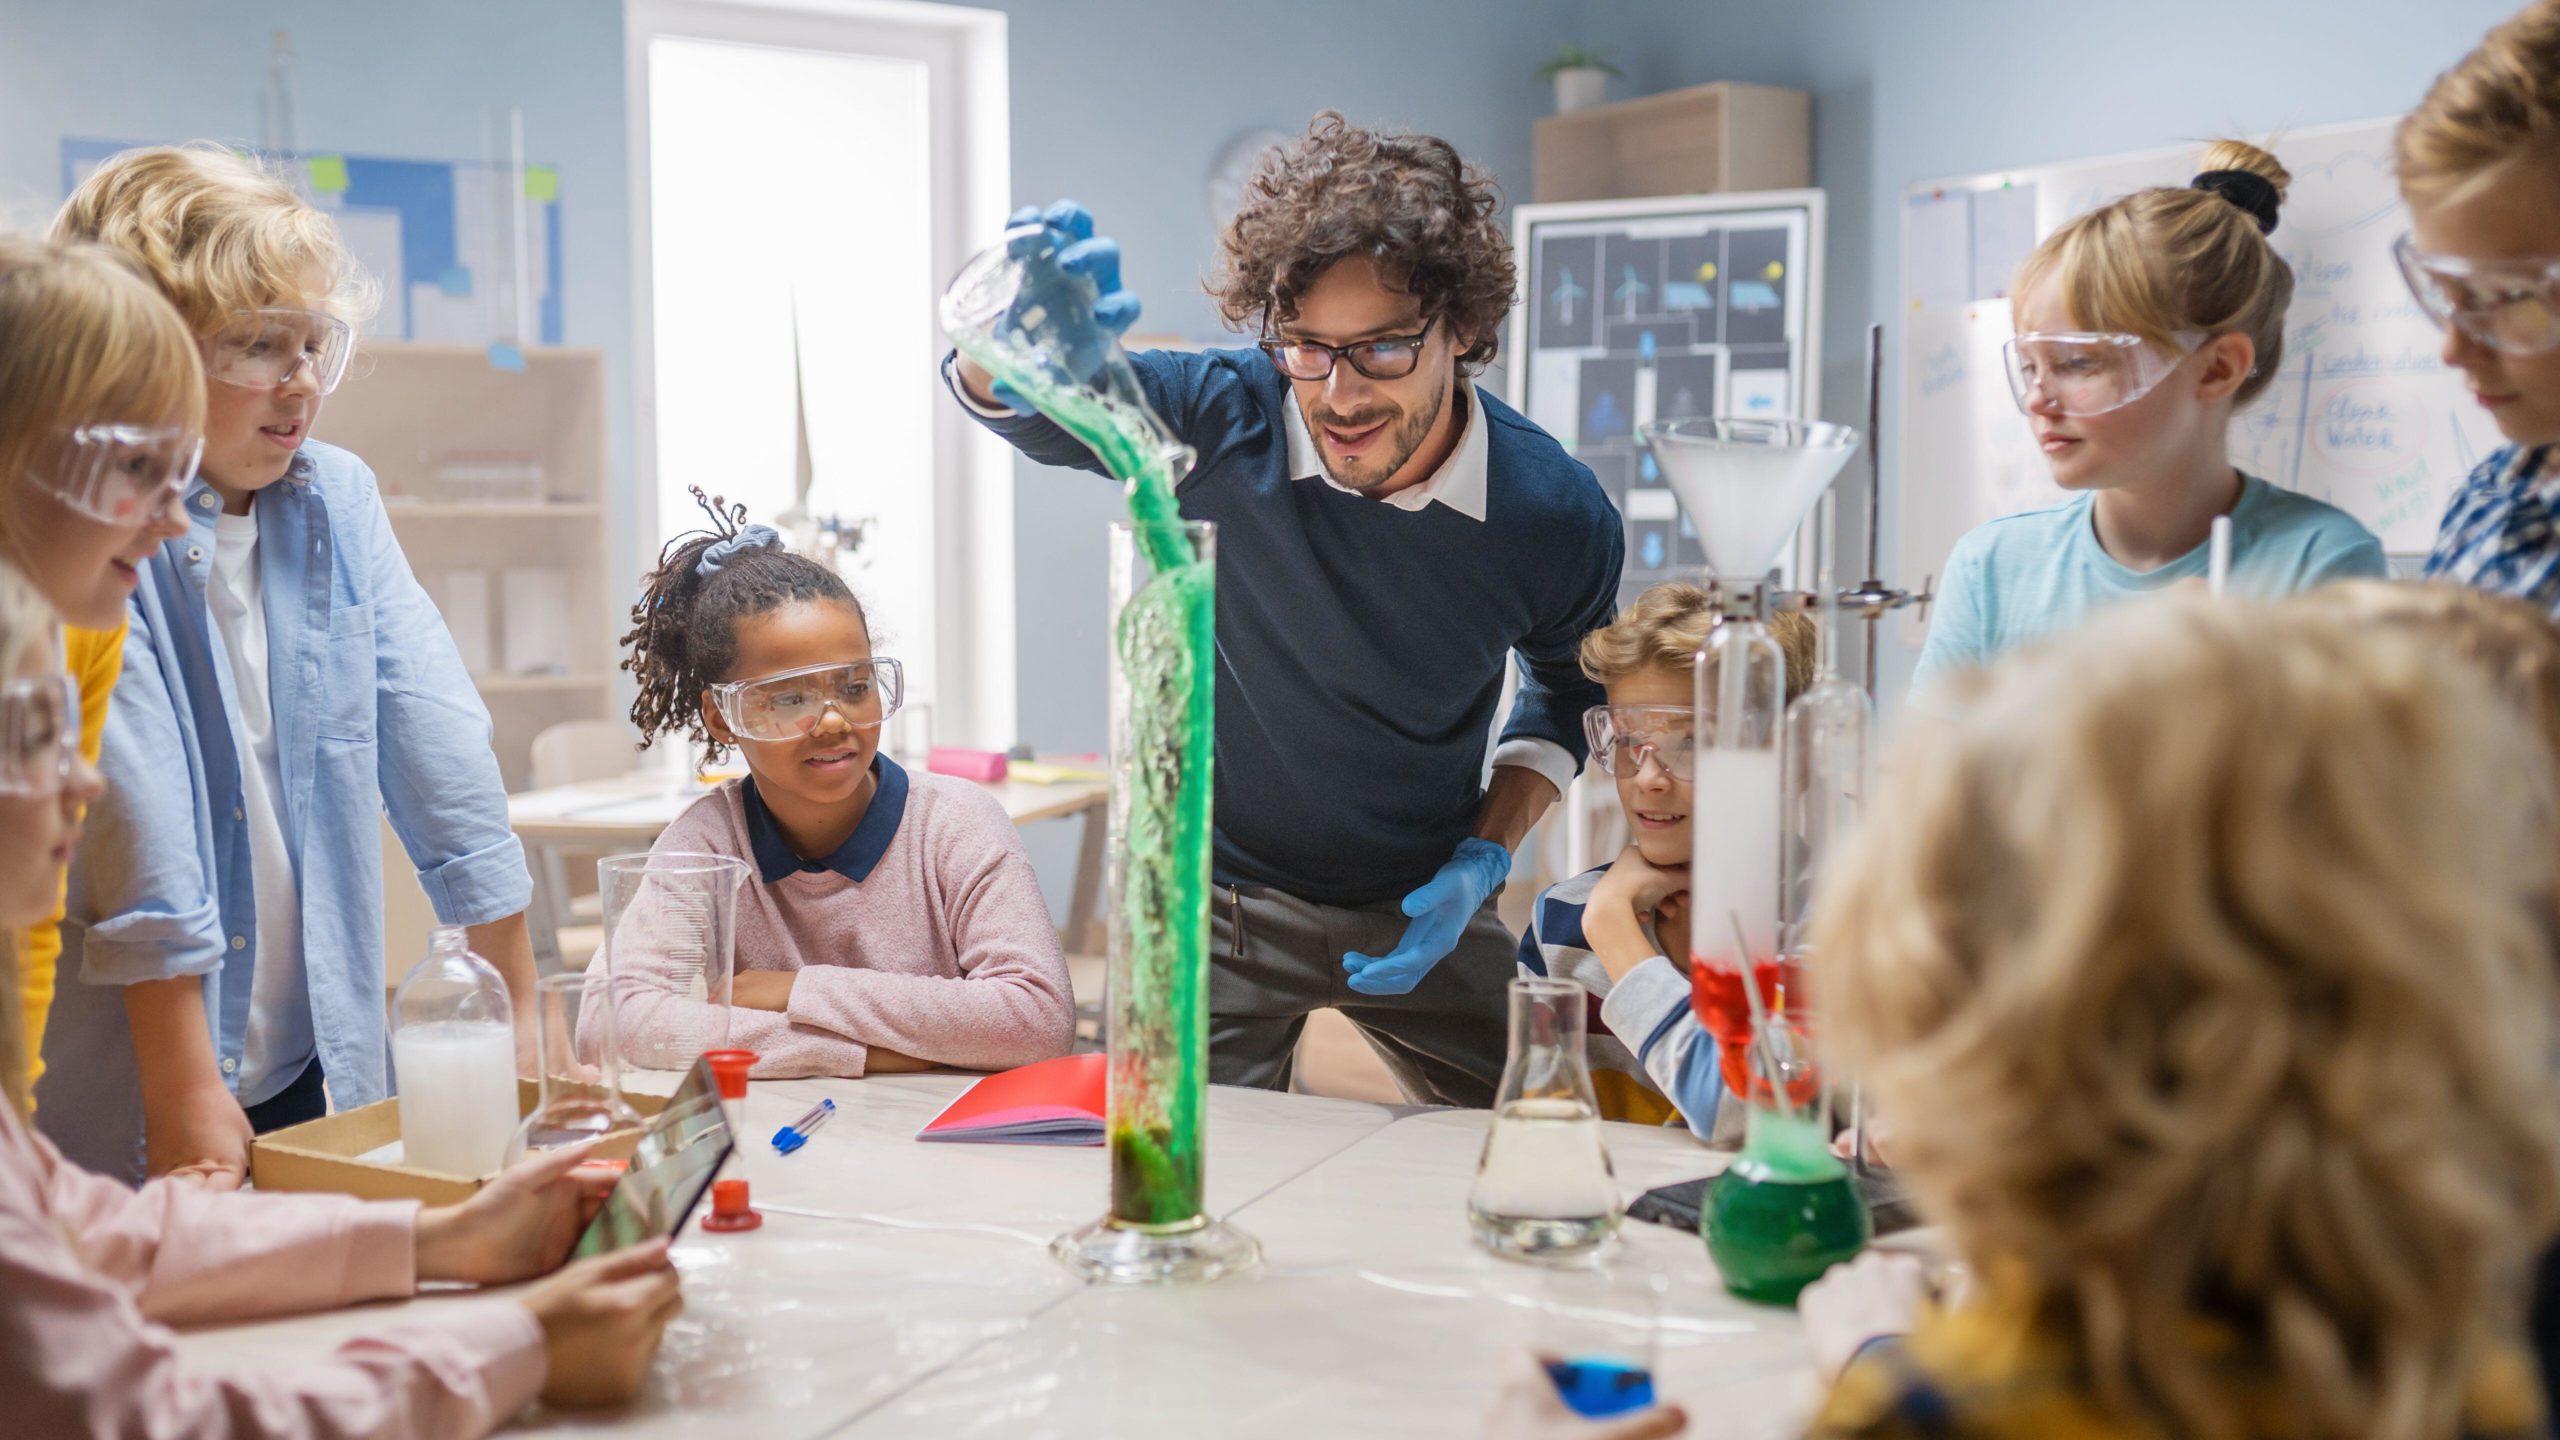 Elementary School Science Chemistry Classroom: Teacher Shows Chemical Reaction Experiment to Group of Children